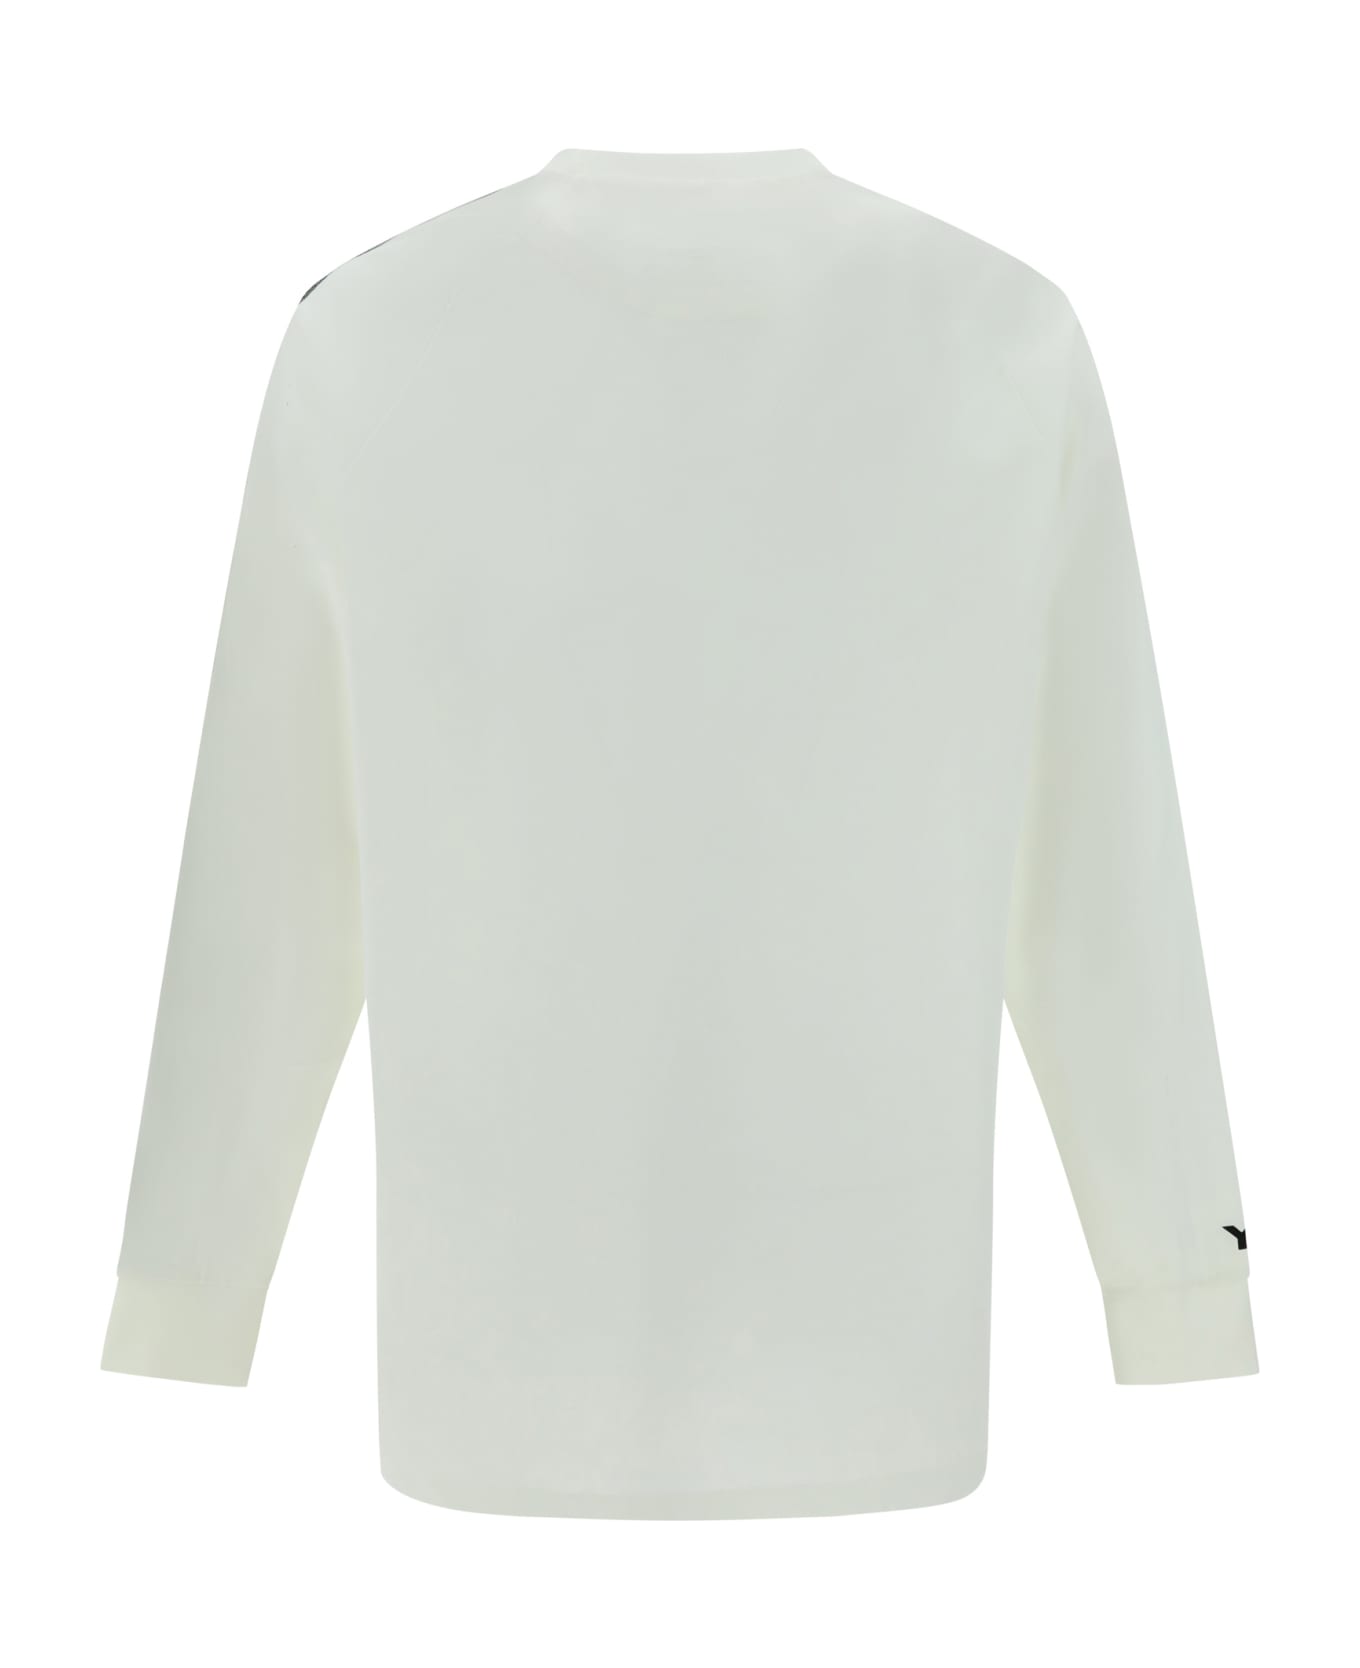 Y-3 Long Sleeve Jersey - Owhite